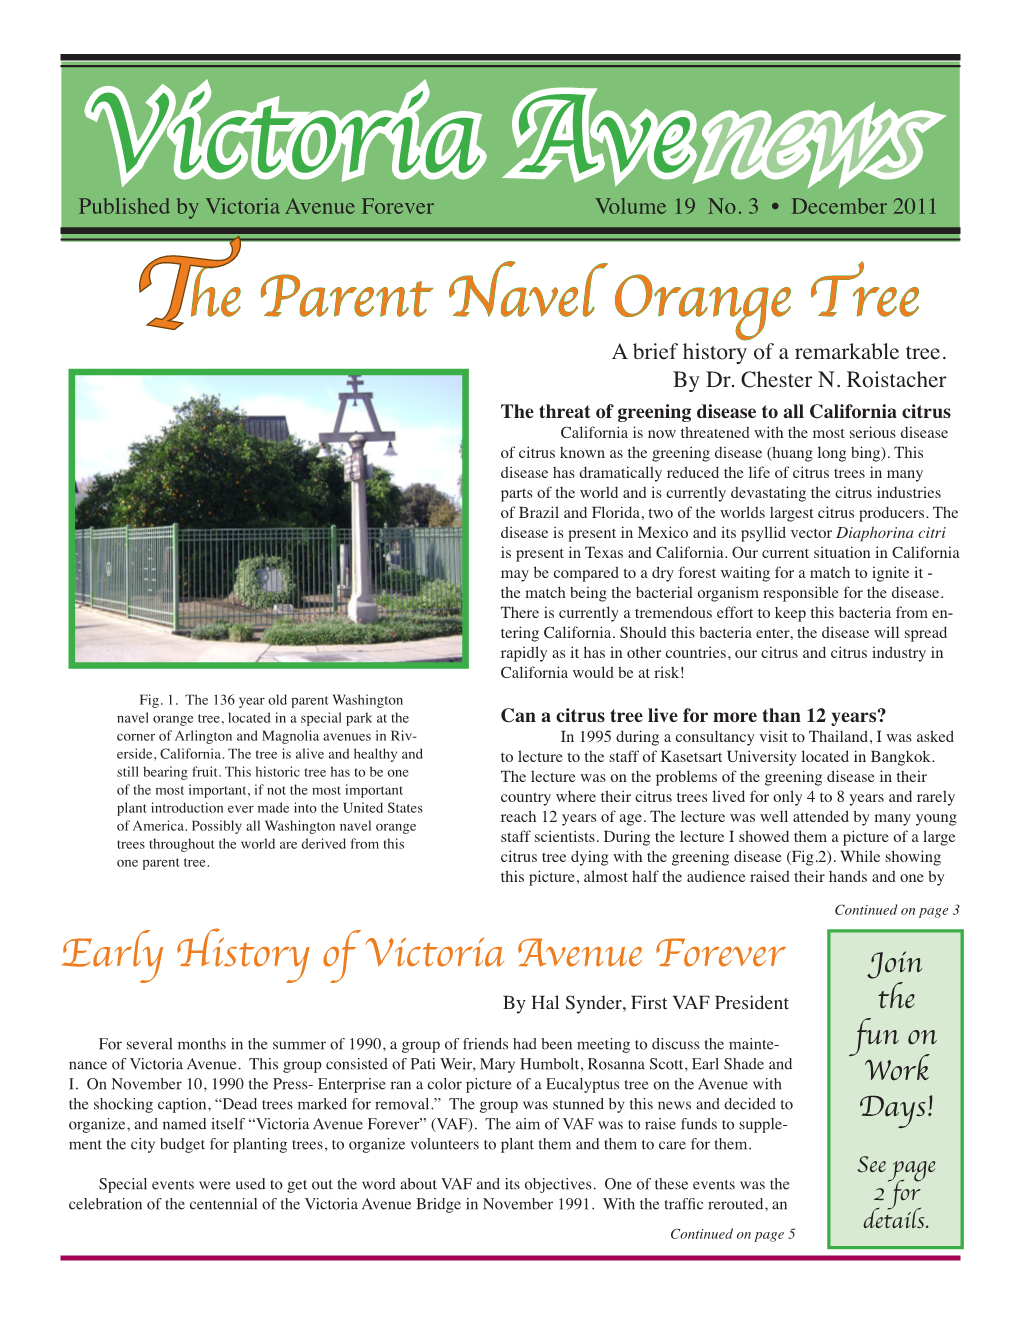 He Parent Navel Orange Tree T a Brief History of a Remarkable Tree